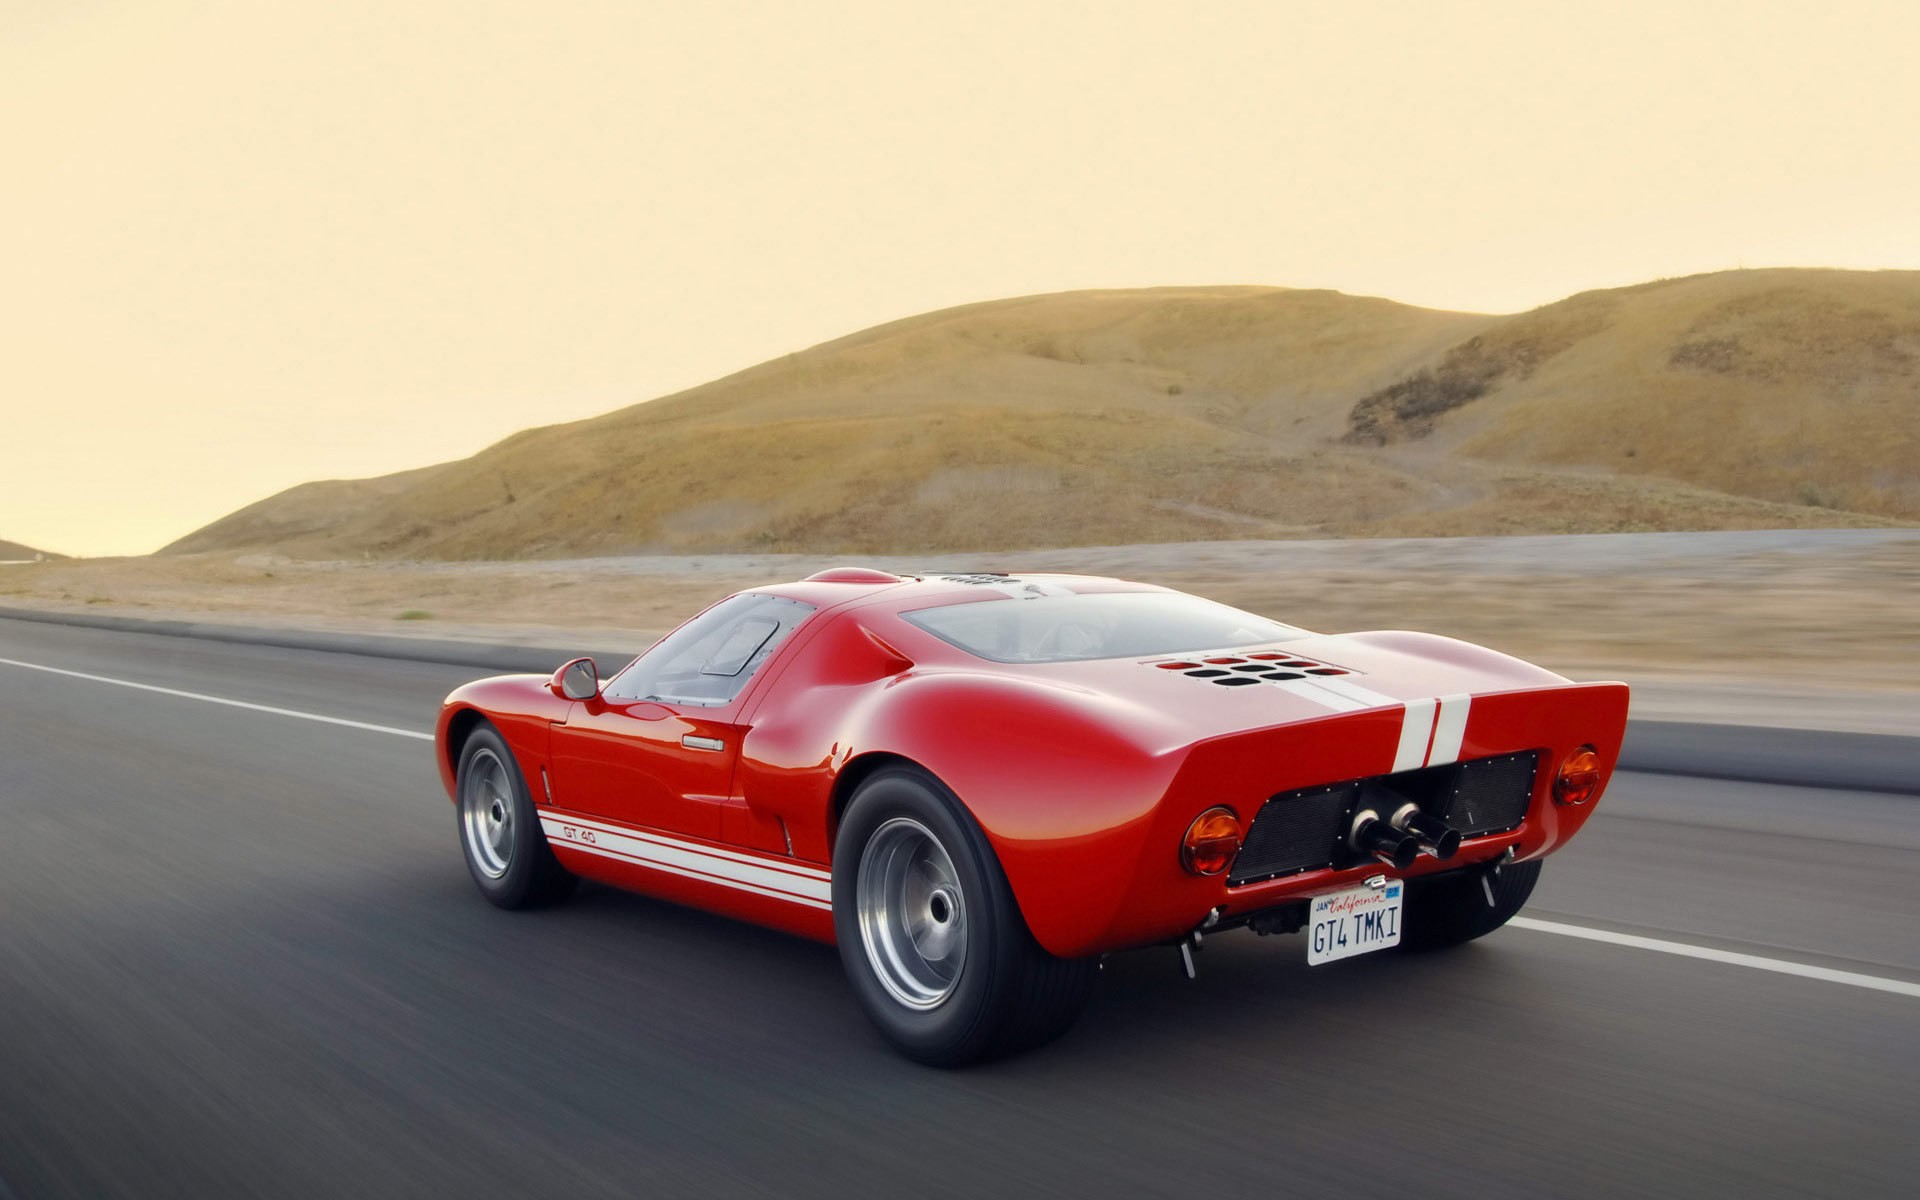 General 1920x1200 car Ford GT40 Ford road red cars asphalt vehicle American cars racing stripes